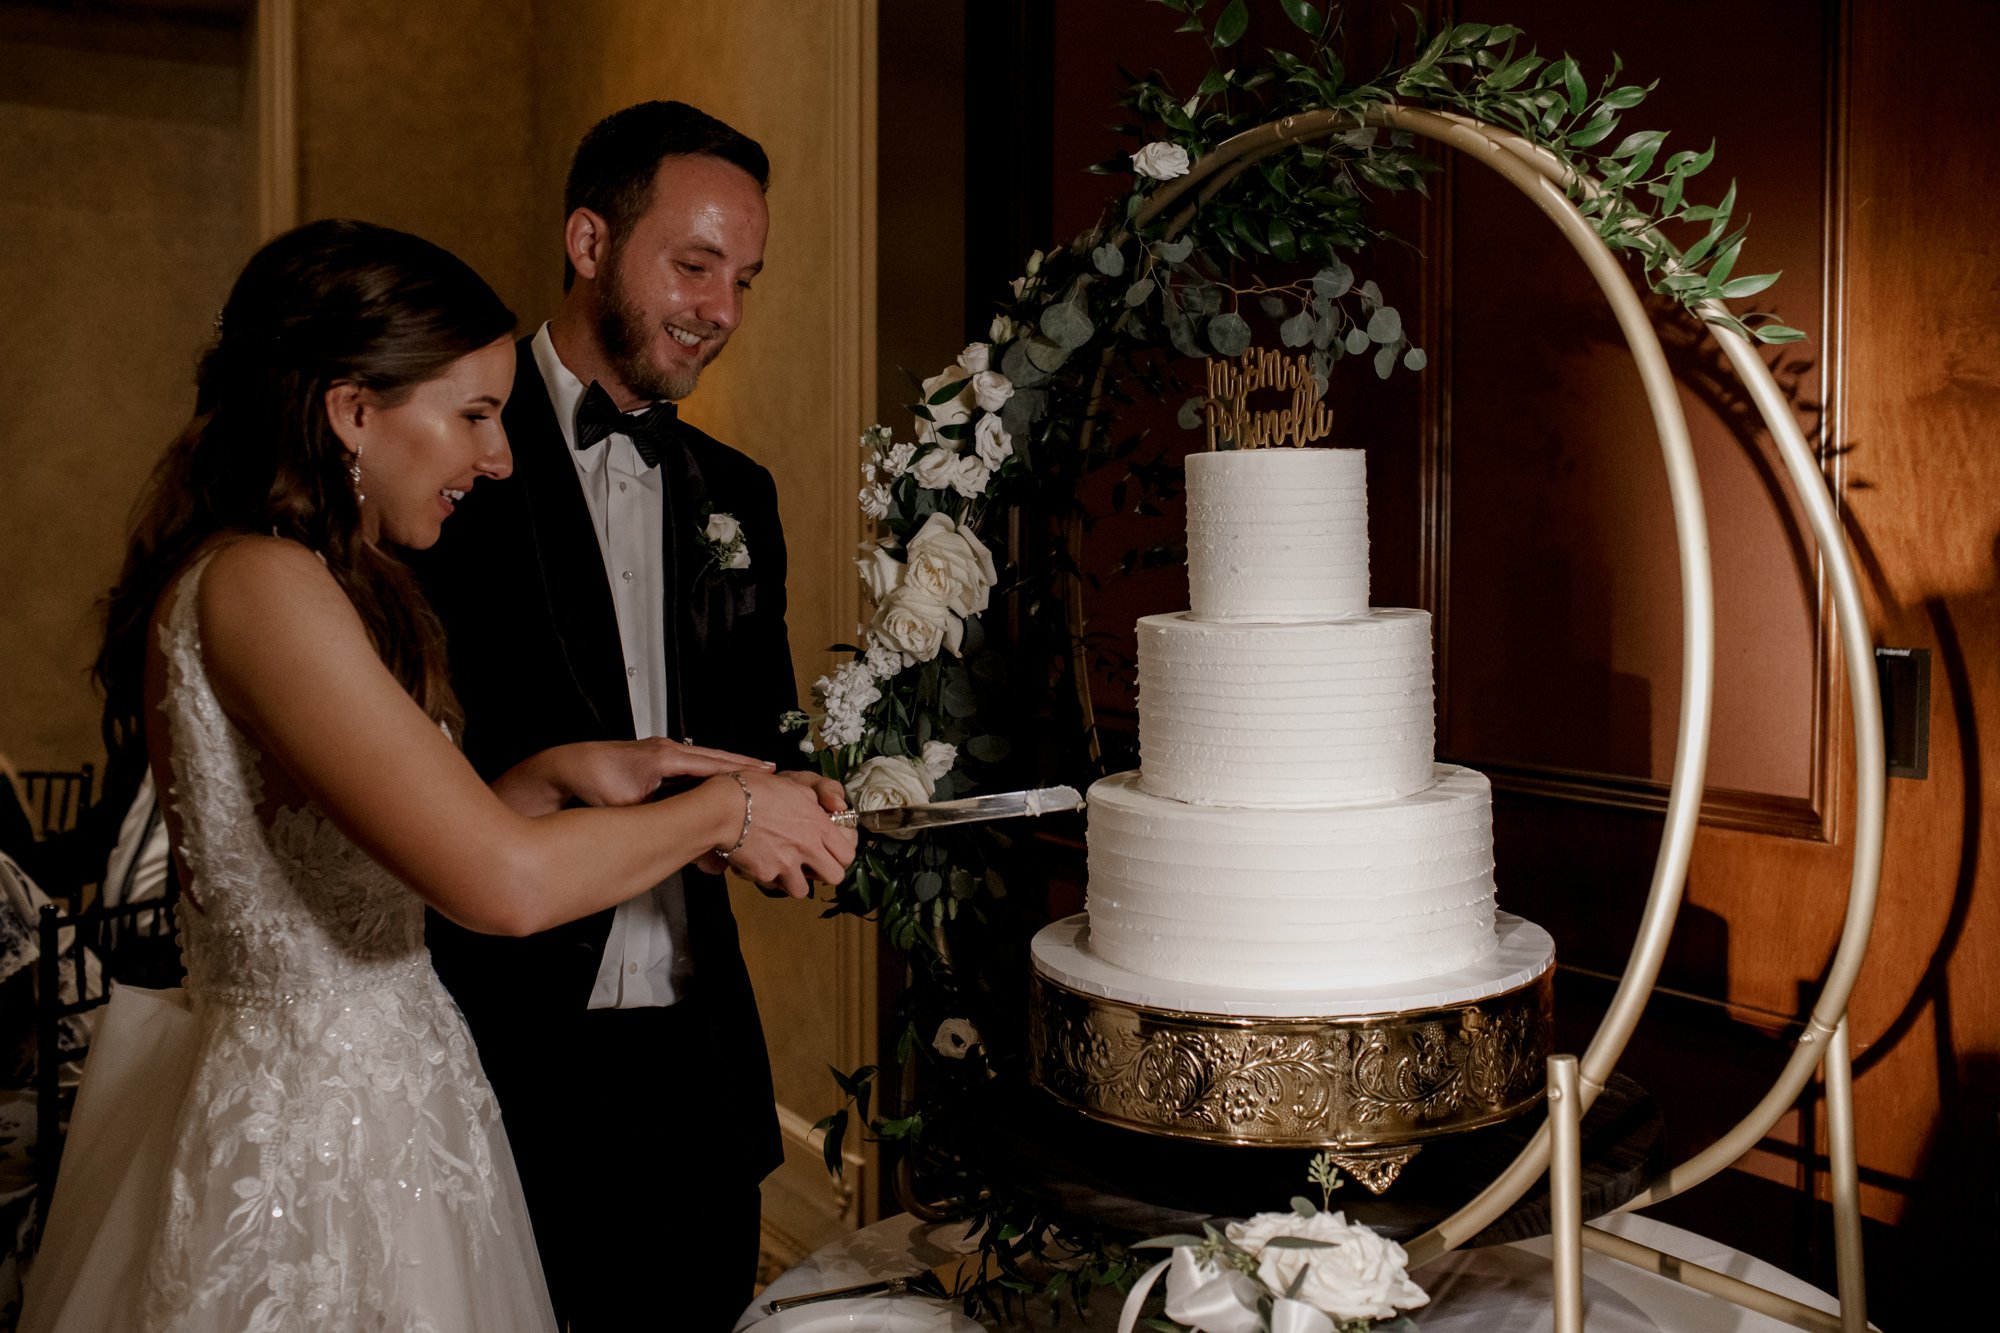 Bride and groom cutting the cake. Wedding reception at Royal Oaks Country Club